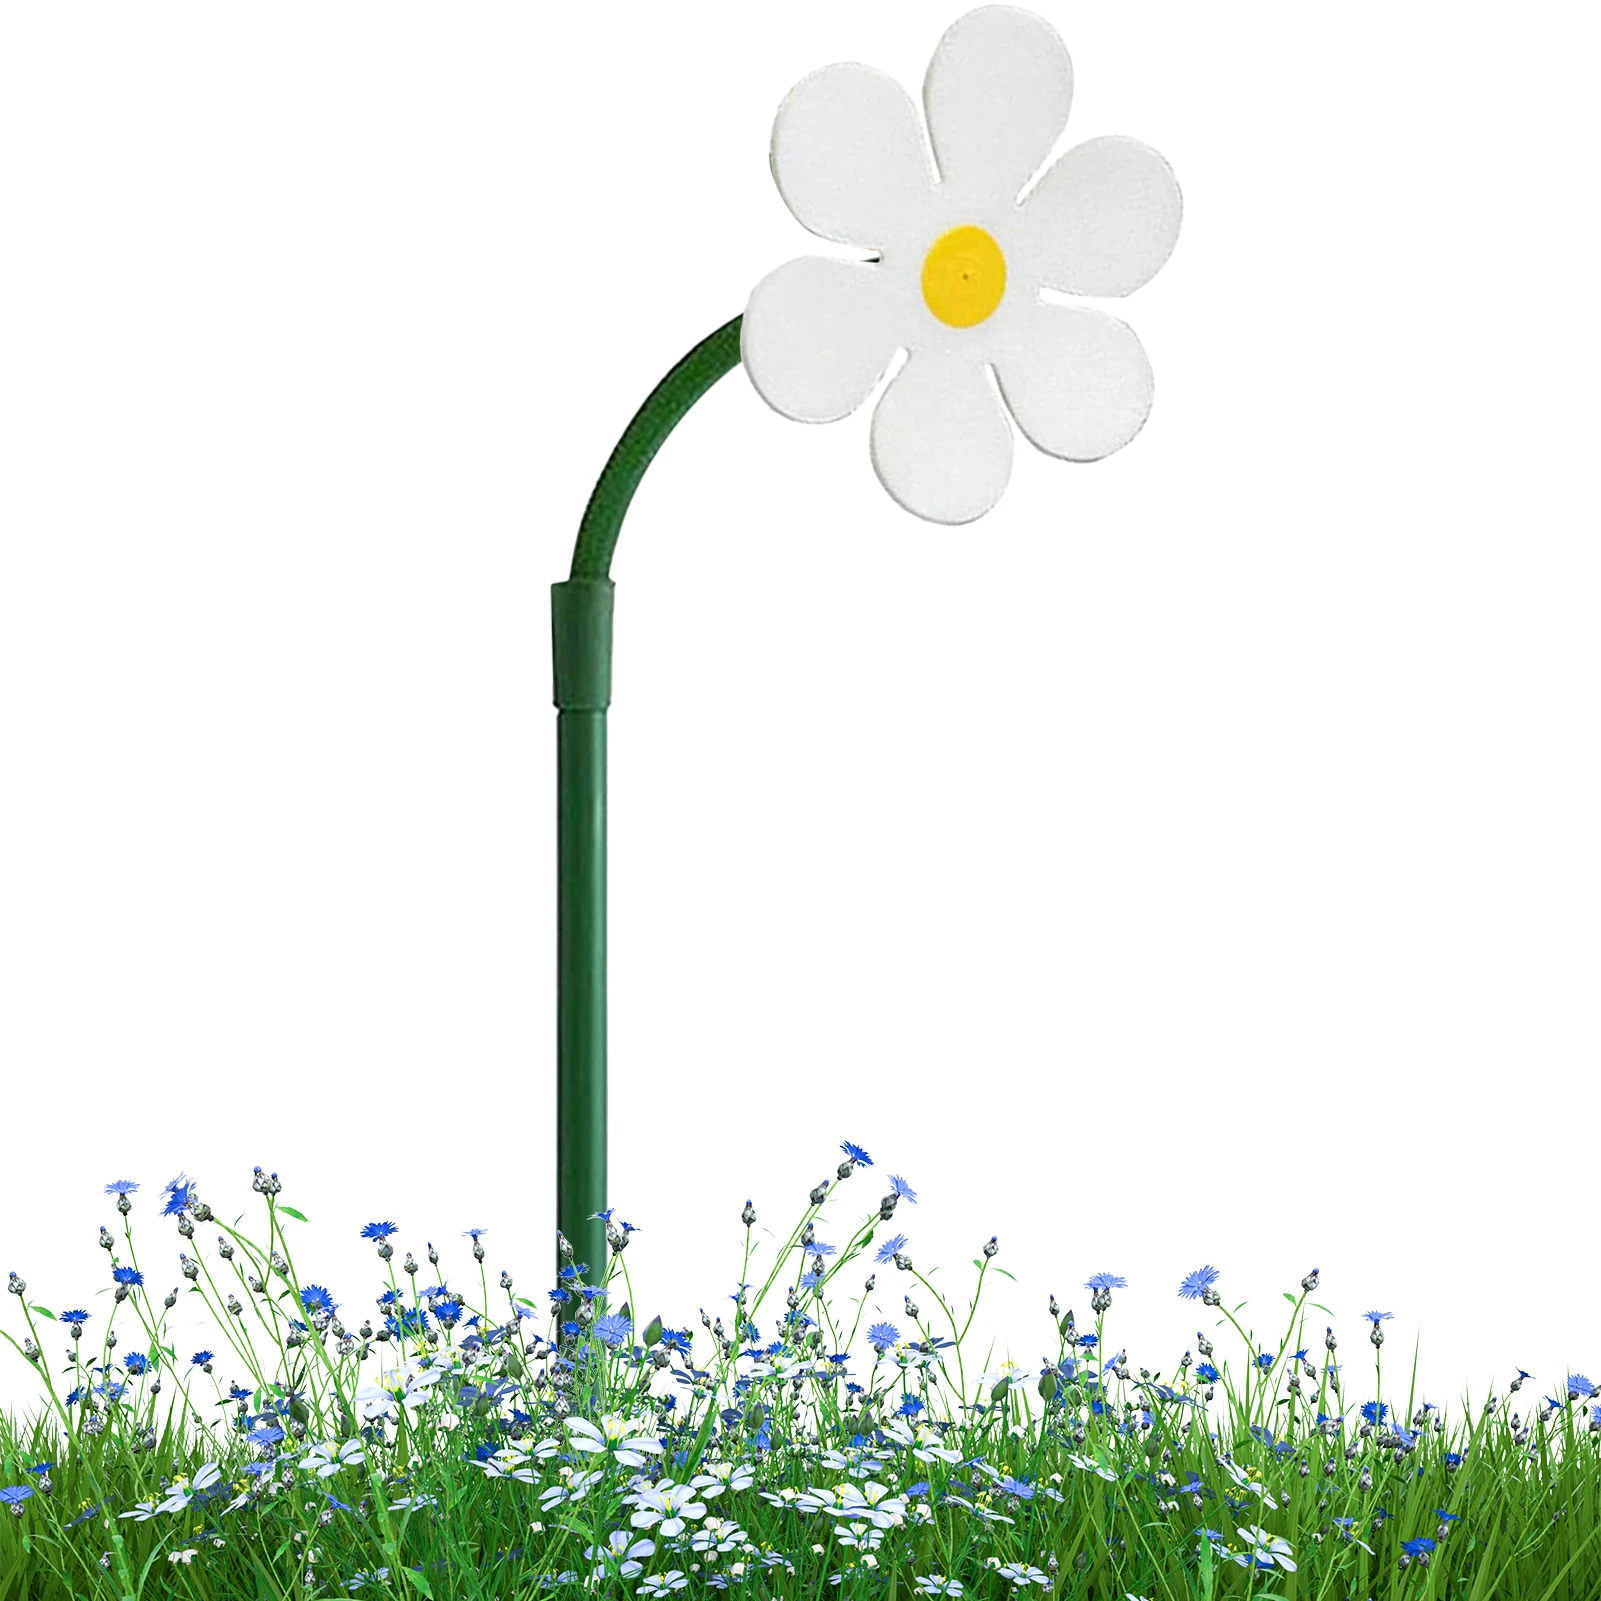 

Garden Sprinkler Cute Flower Shape Crazy Whirling Yard Sprinklers 720 Degrees Rotating Funny Colorful Dancing Daisy Lawn